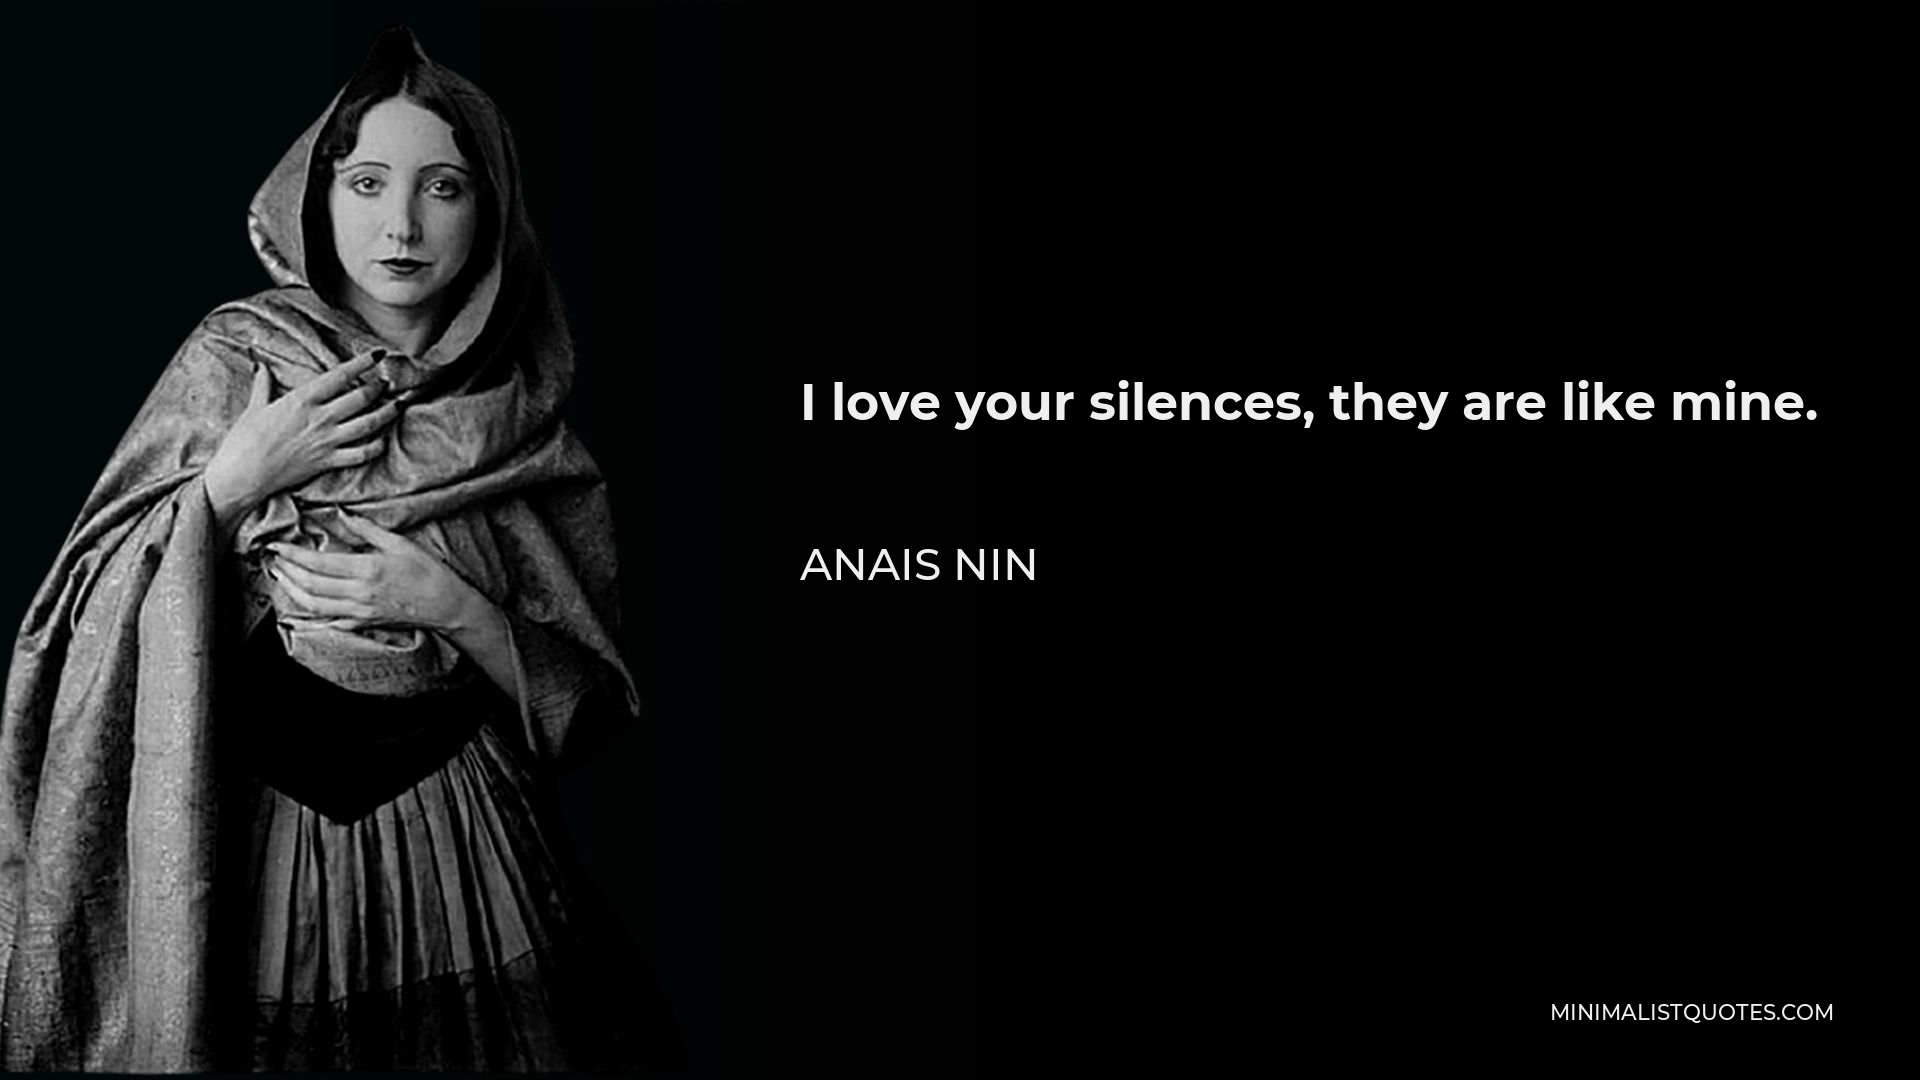 Anais Nin Quote - I love your silences, they are like mine.